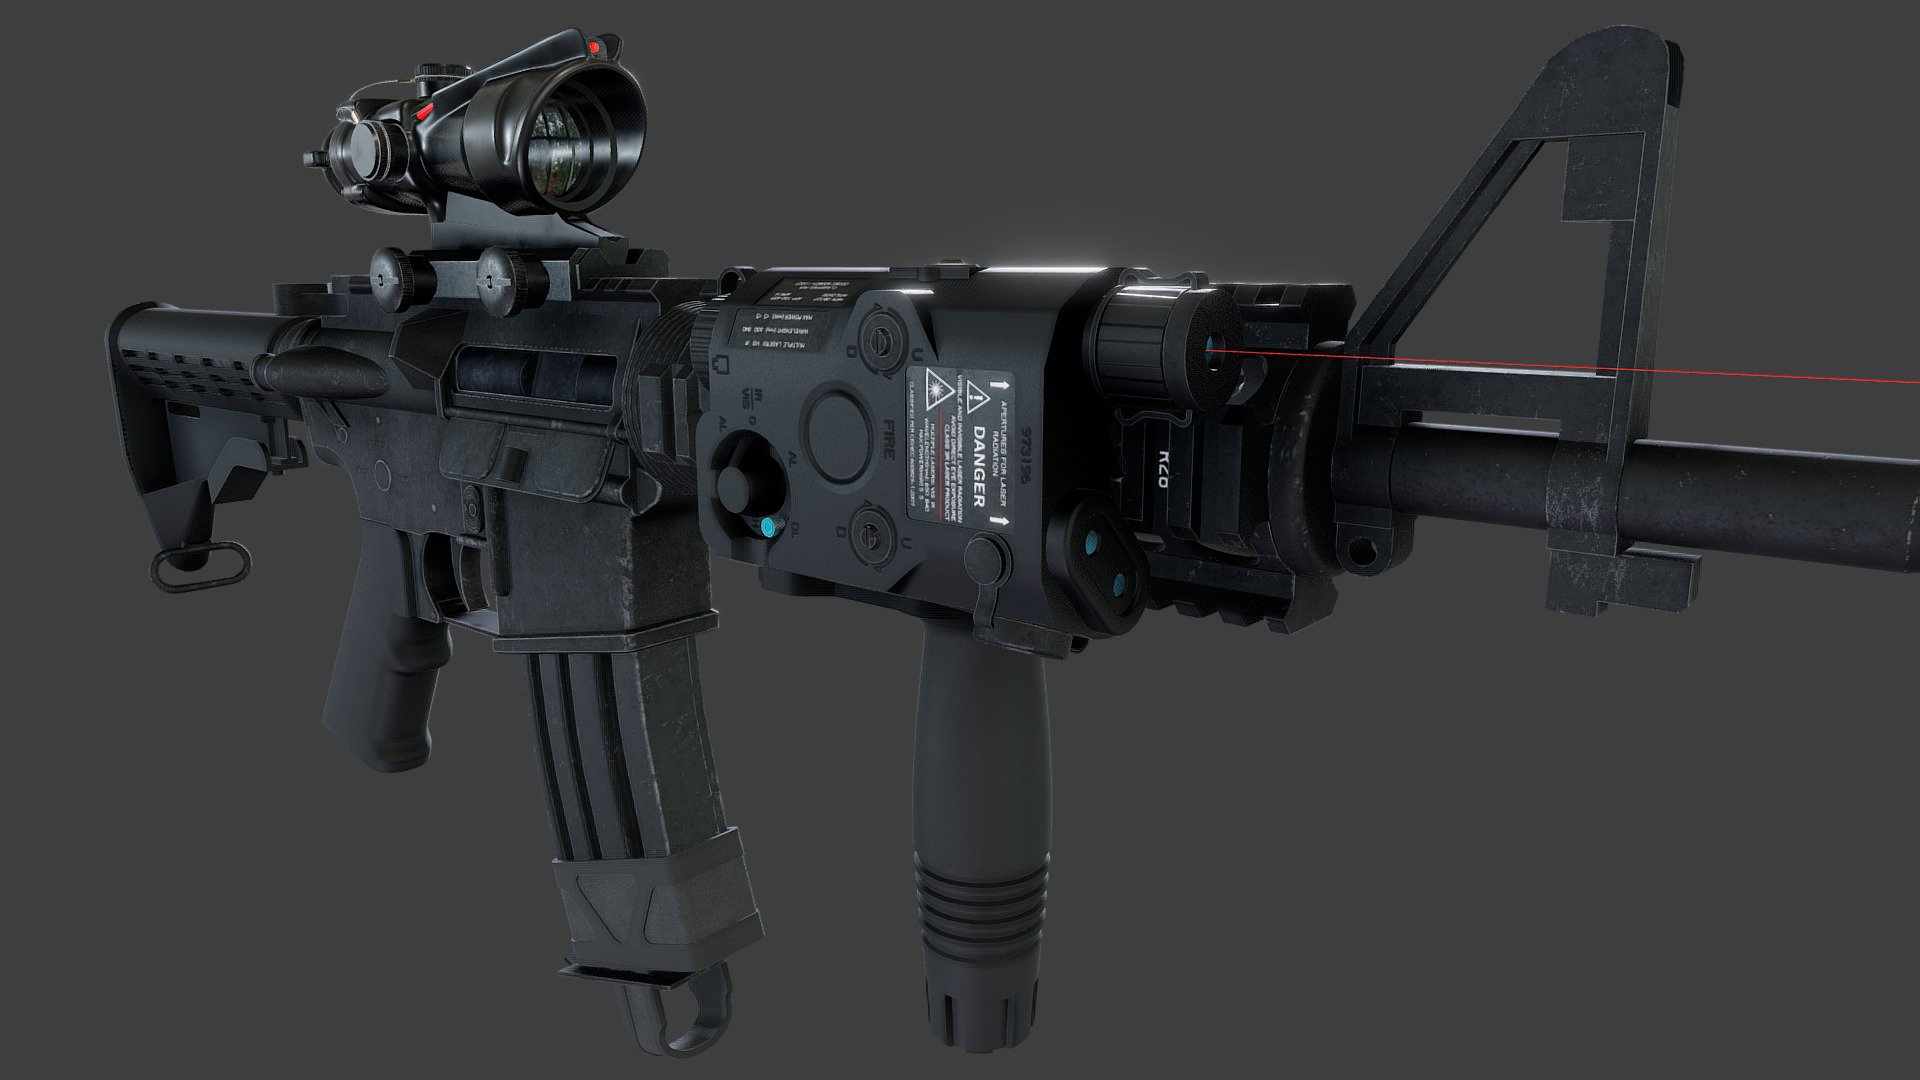 M4 Carbine Rifle ACOG sight rifle, m4, videogame, textures, army, materials, unreal, carbine, acog, sight, videojuego, united, marines, weapon, unity, asset, 3d, pbr, model, military, download